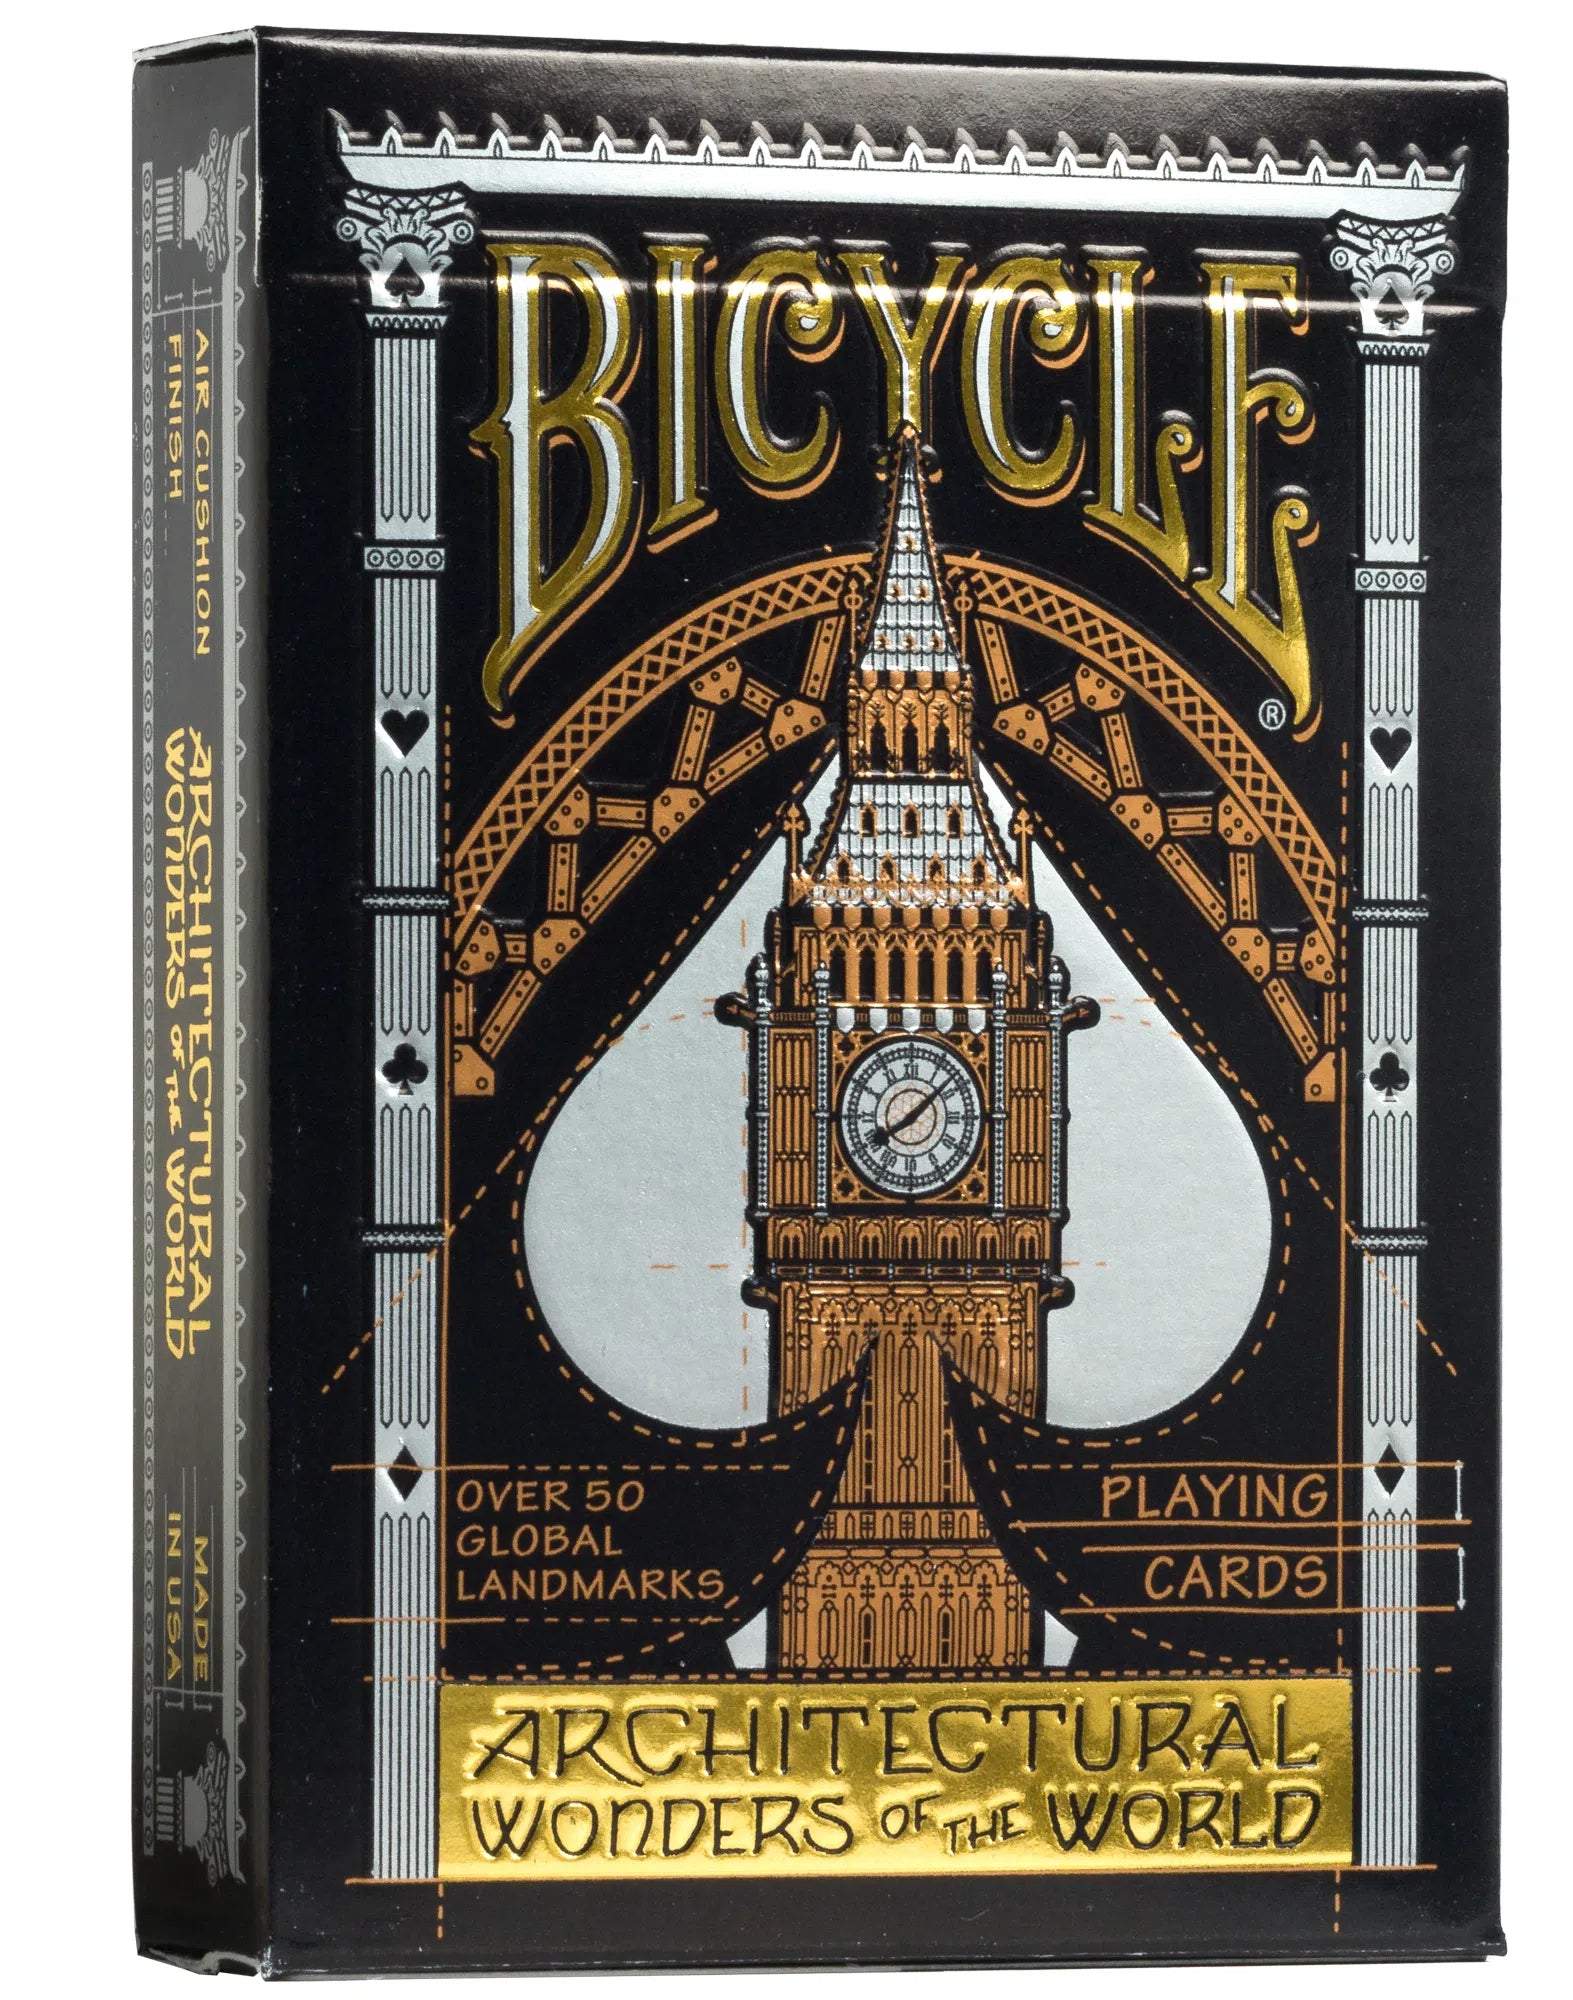 Bicycle - Architectural Wonders of the World